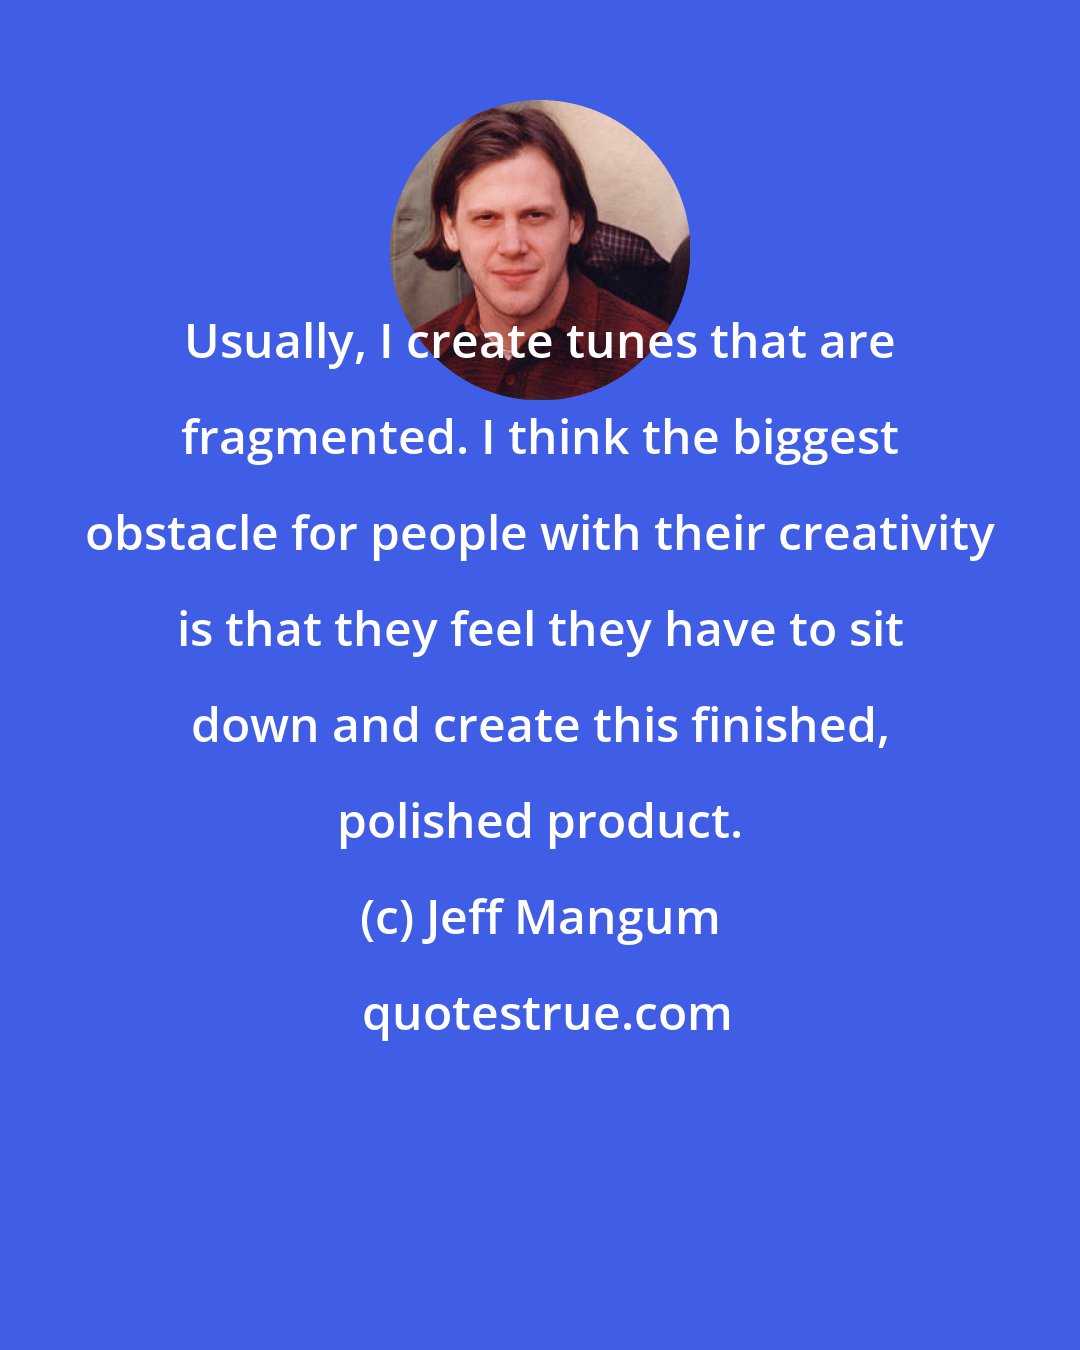 Jeff Mangum: Usually, I create tunes that are fragmented. I think the biggest obstacle for people with their creativity is that they feel they have to sit down and create this finished, polished product.